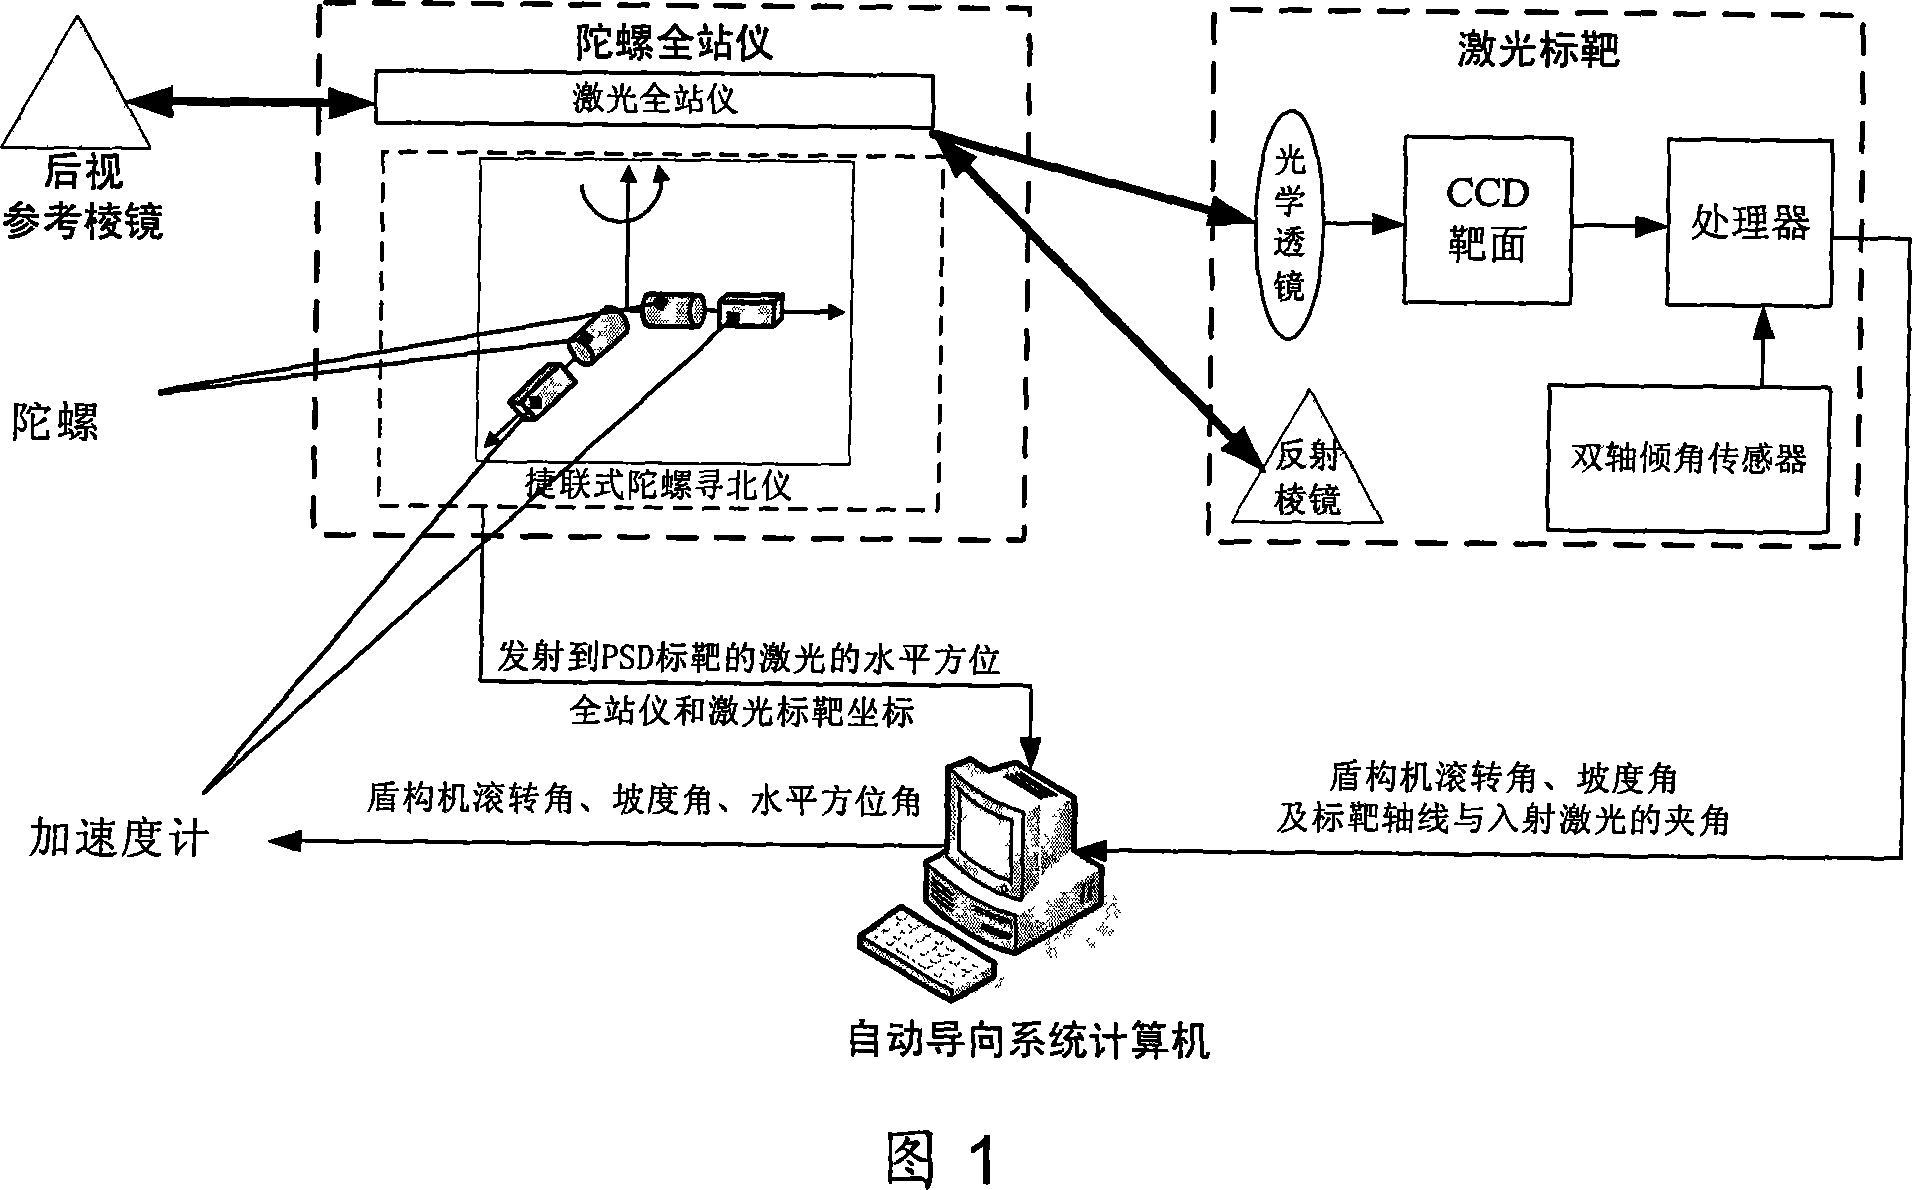 On-line calibration method for shield machine automatic guiding system based on optical fiber gyro and PSD laser target